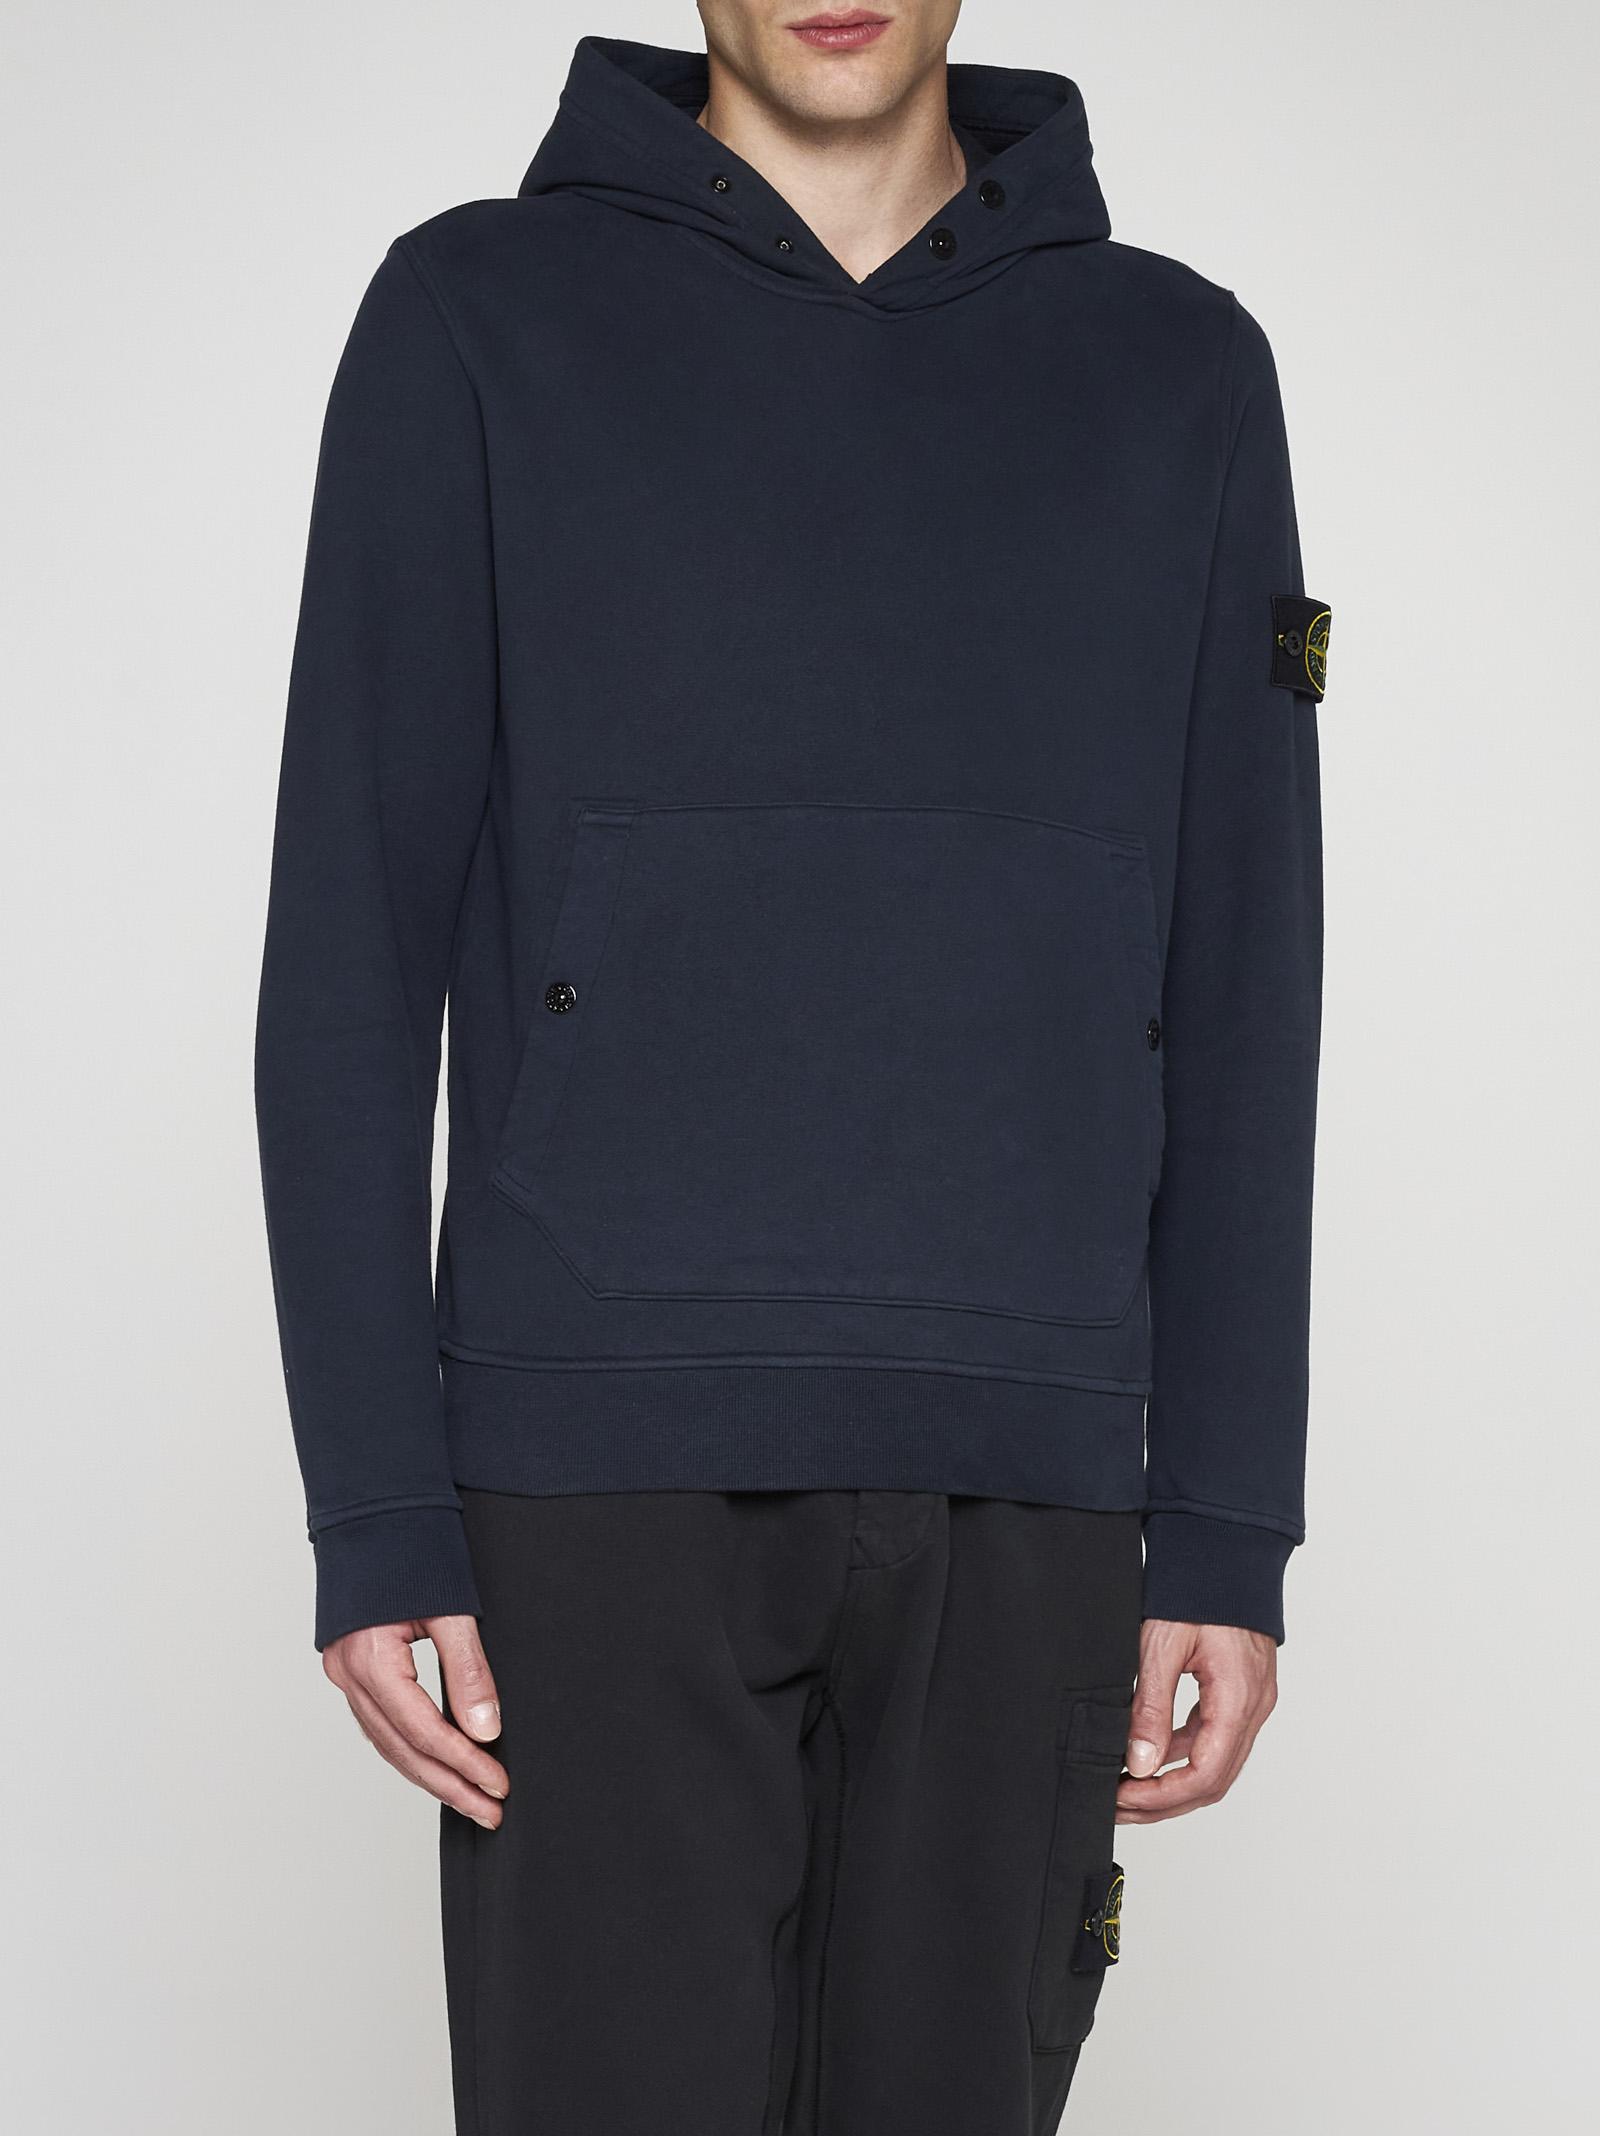 Stone Island Cotton Hoodie in Blue for Men | Lyst